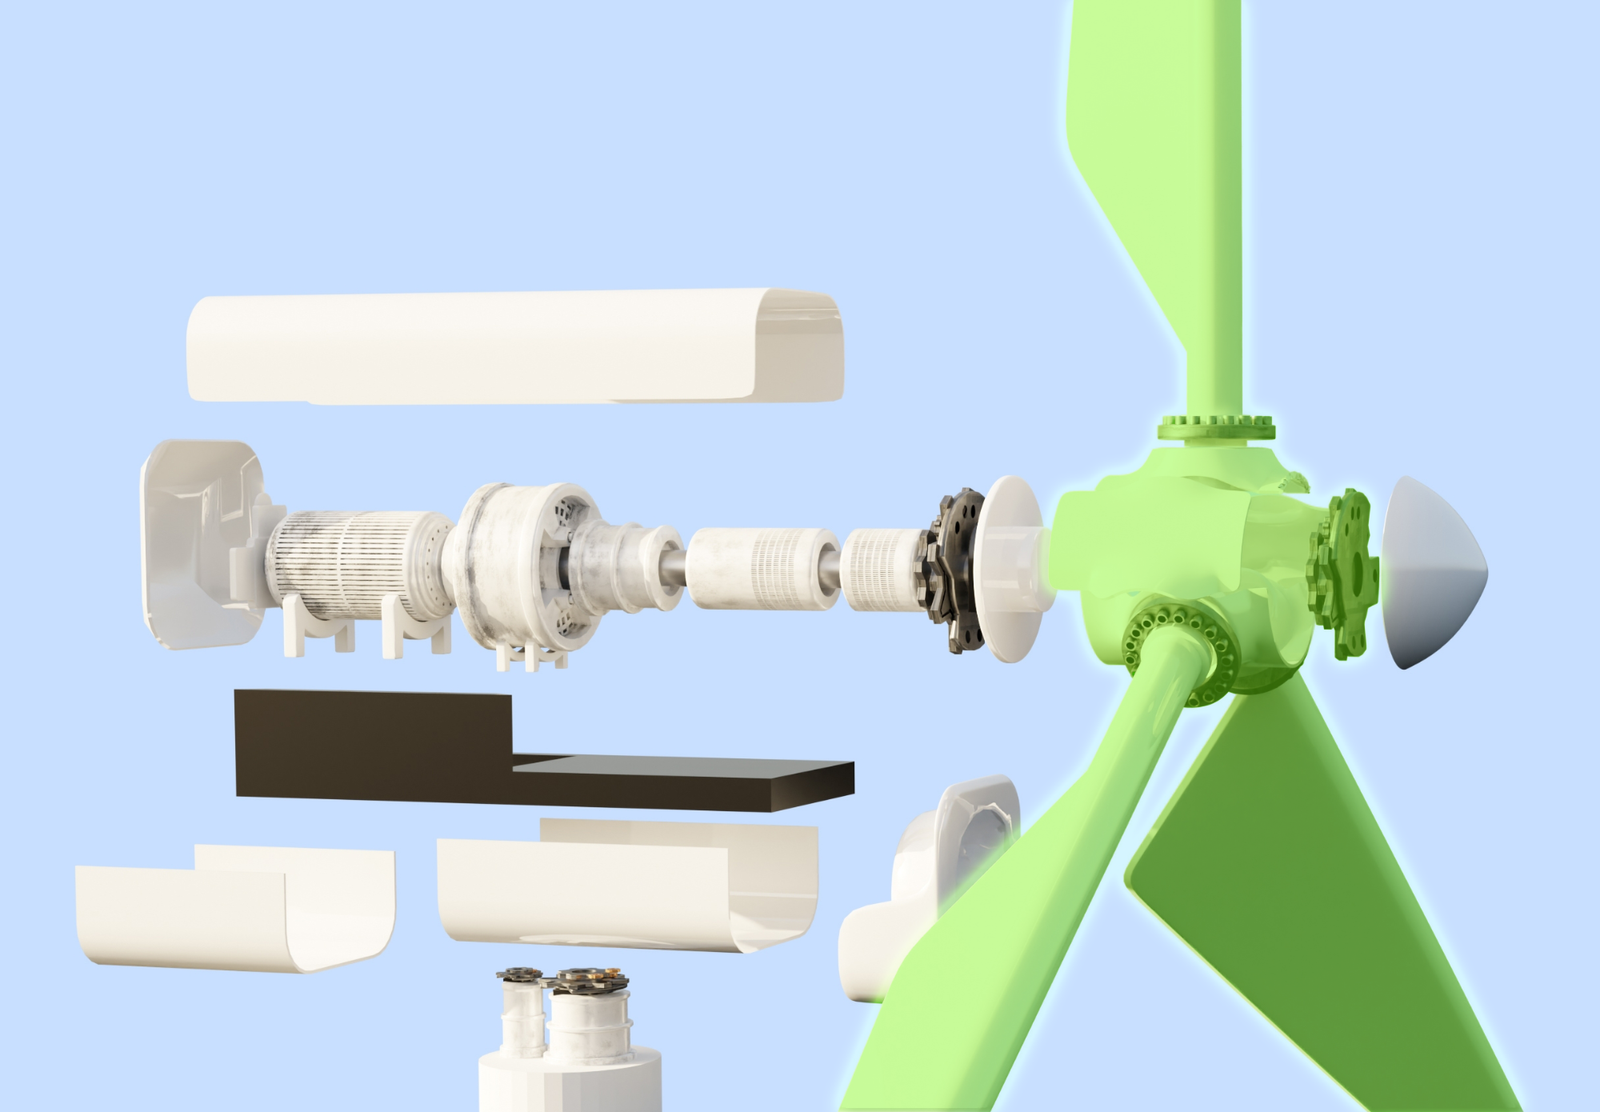 Wind Turbine Components Explode Diagram Highlighting Rotor and Blades